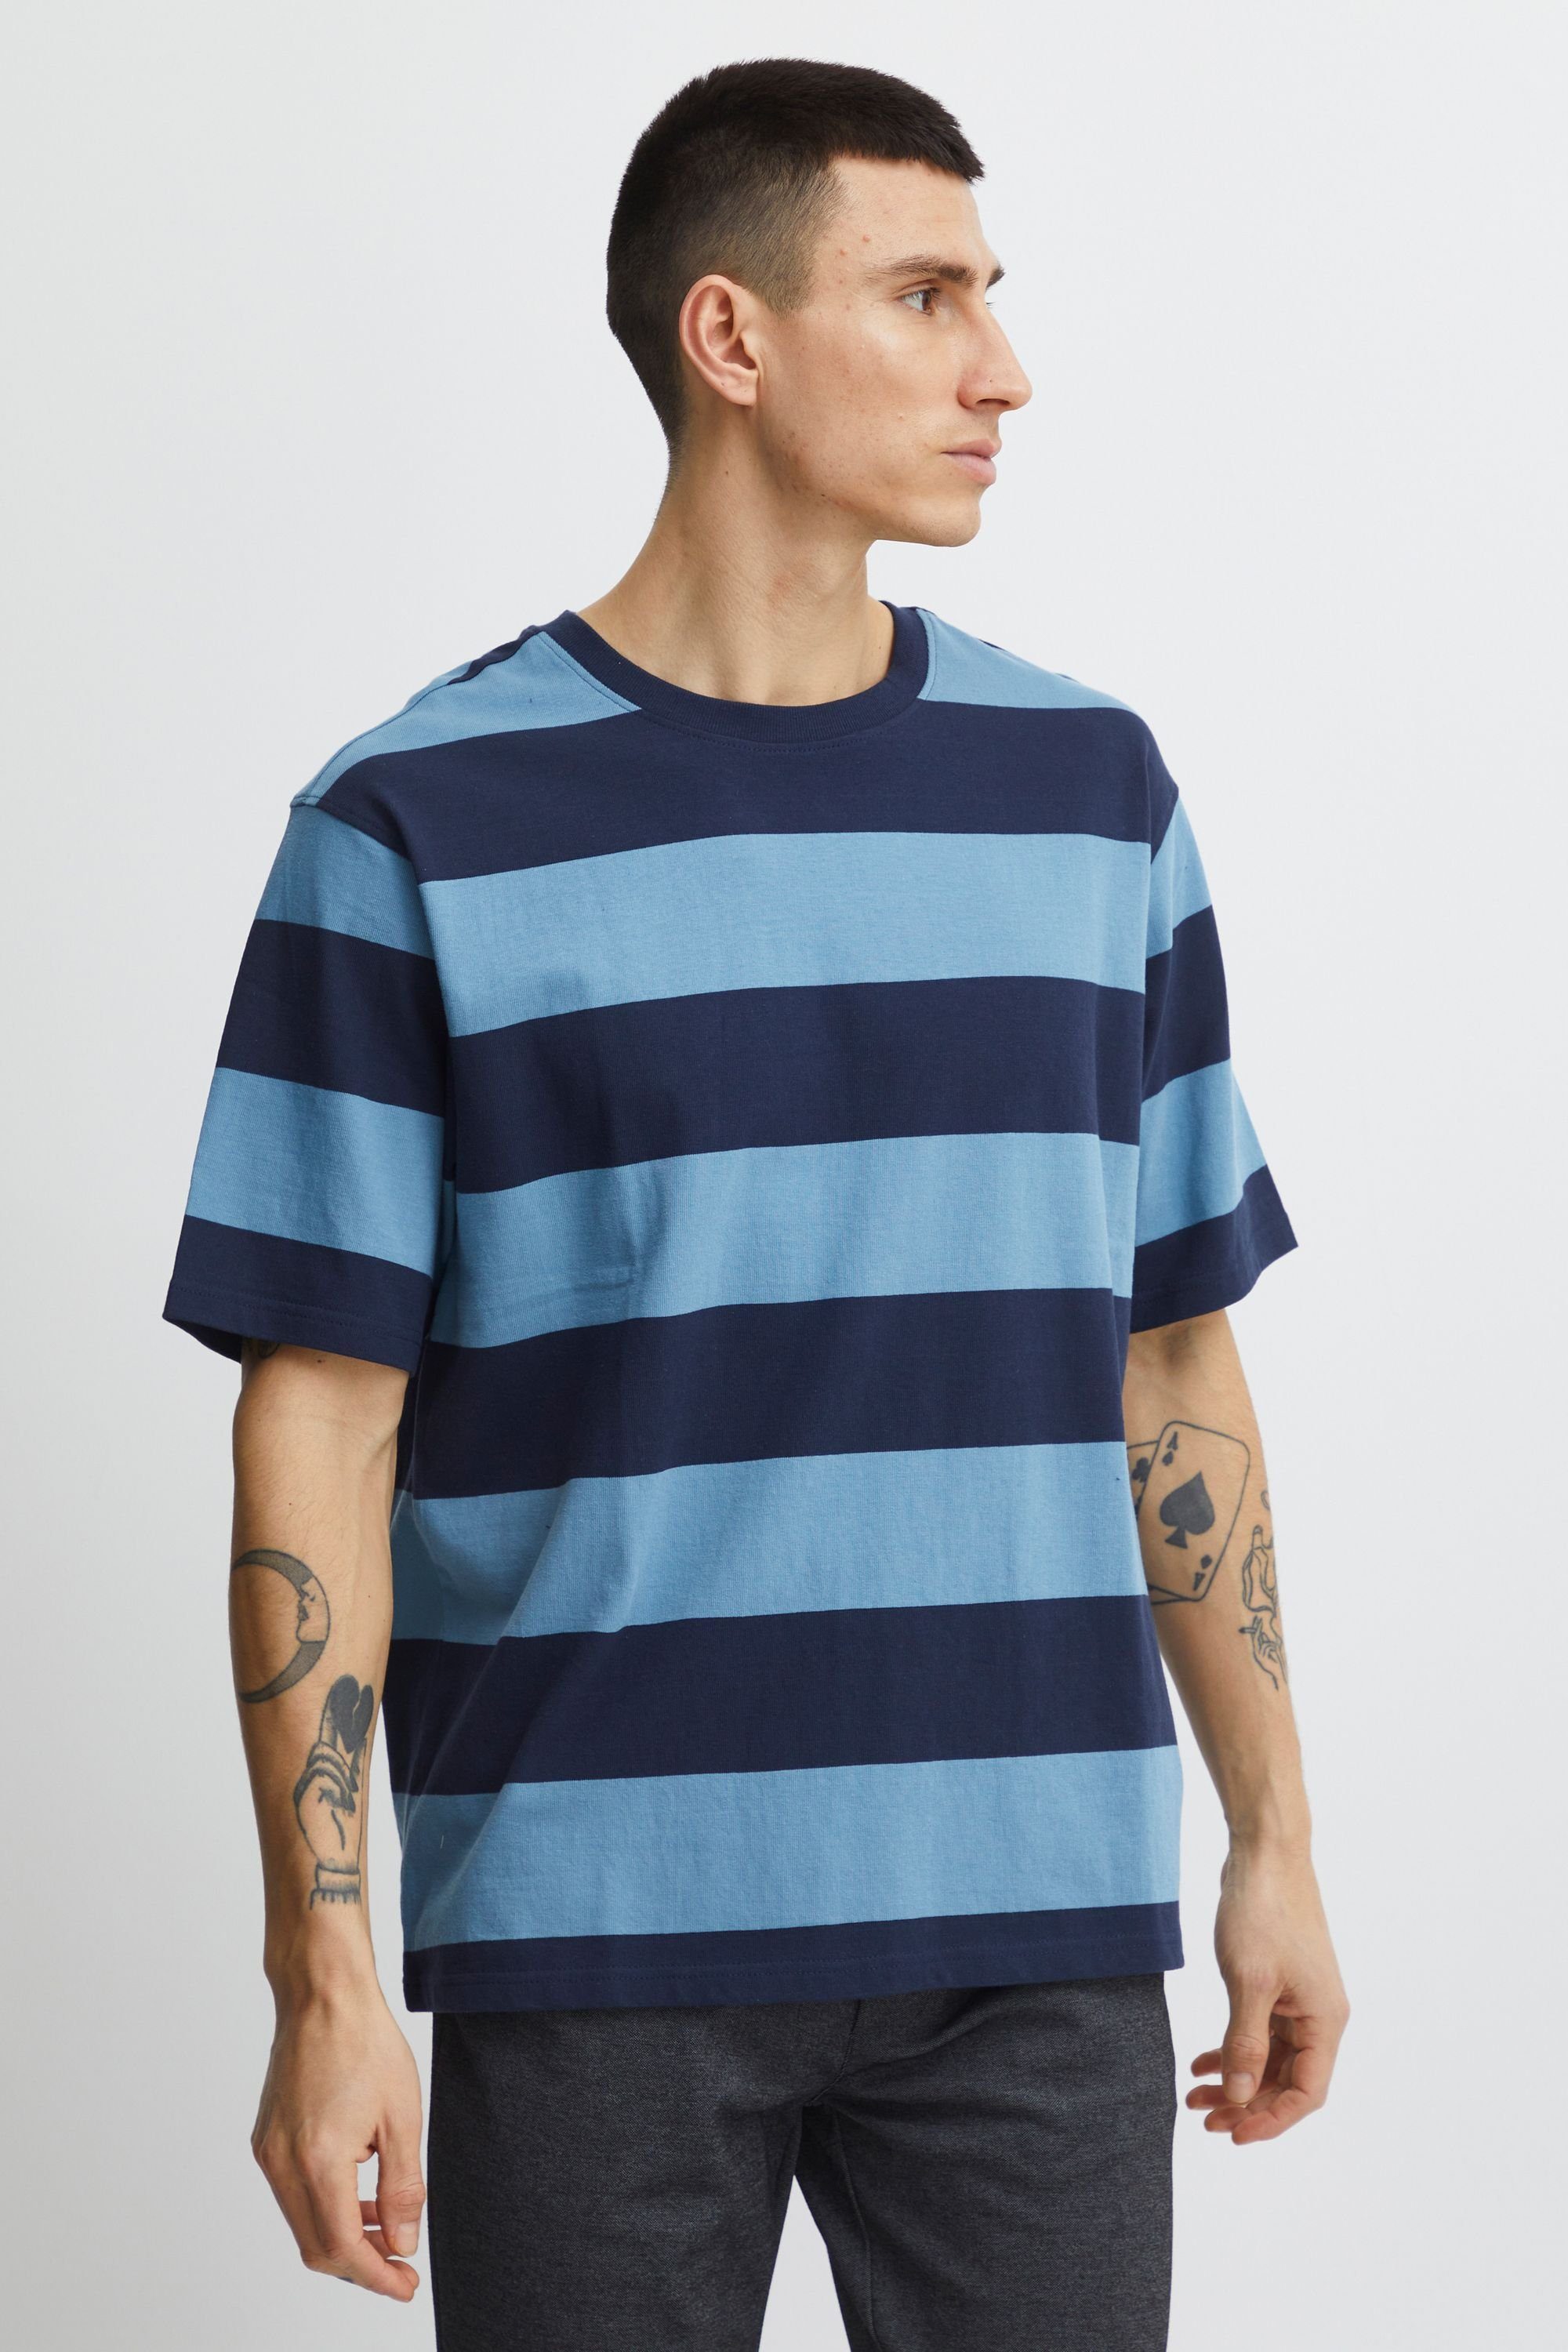 Solid T-Shirt - S Tee 21300987-ME (184220) SDJoey Blue Provincial